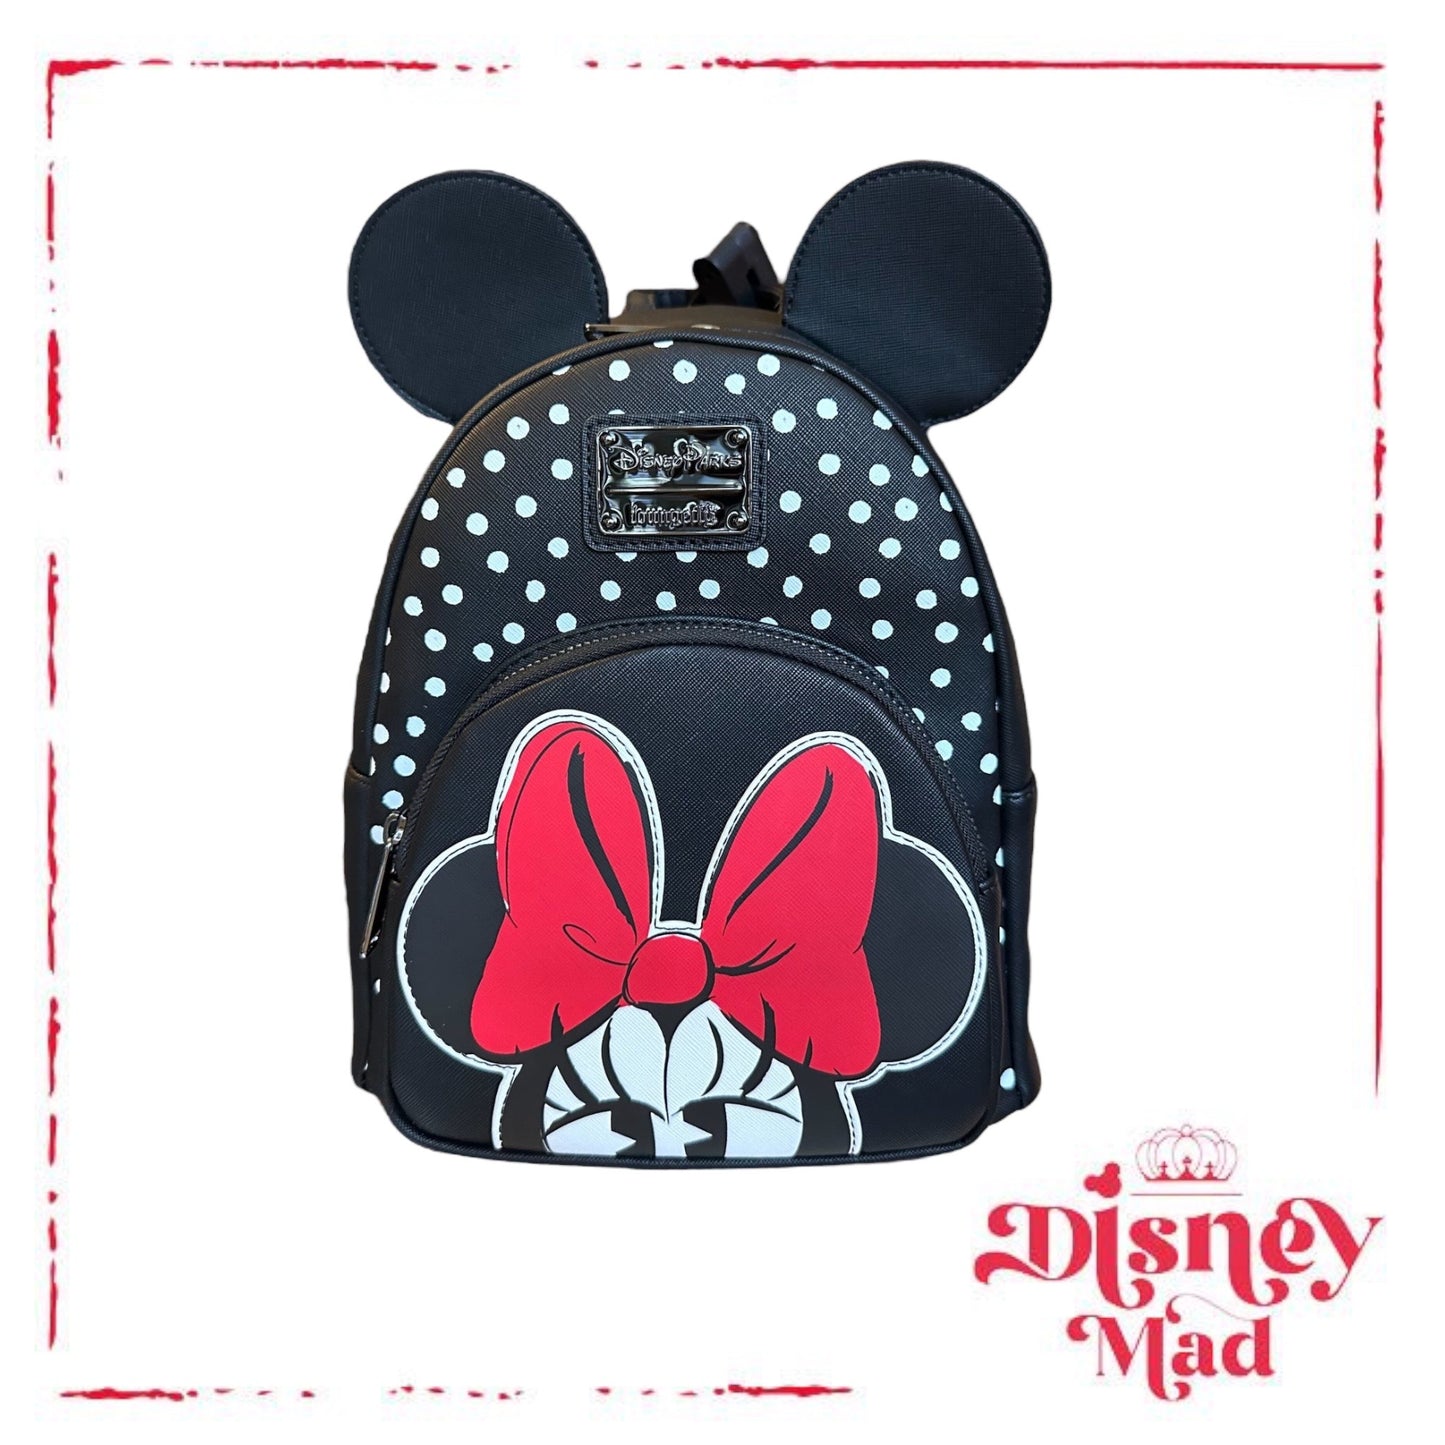 Disney Parks Minnie Mouse Black and White Polka Dot Loungefly Backpack